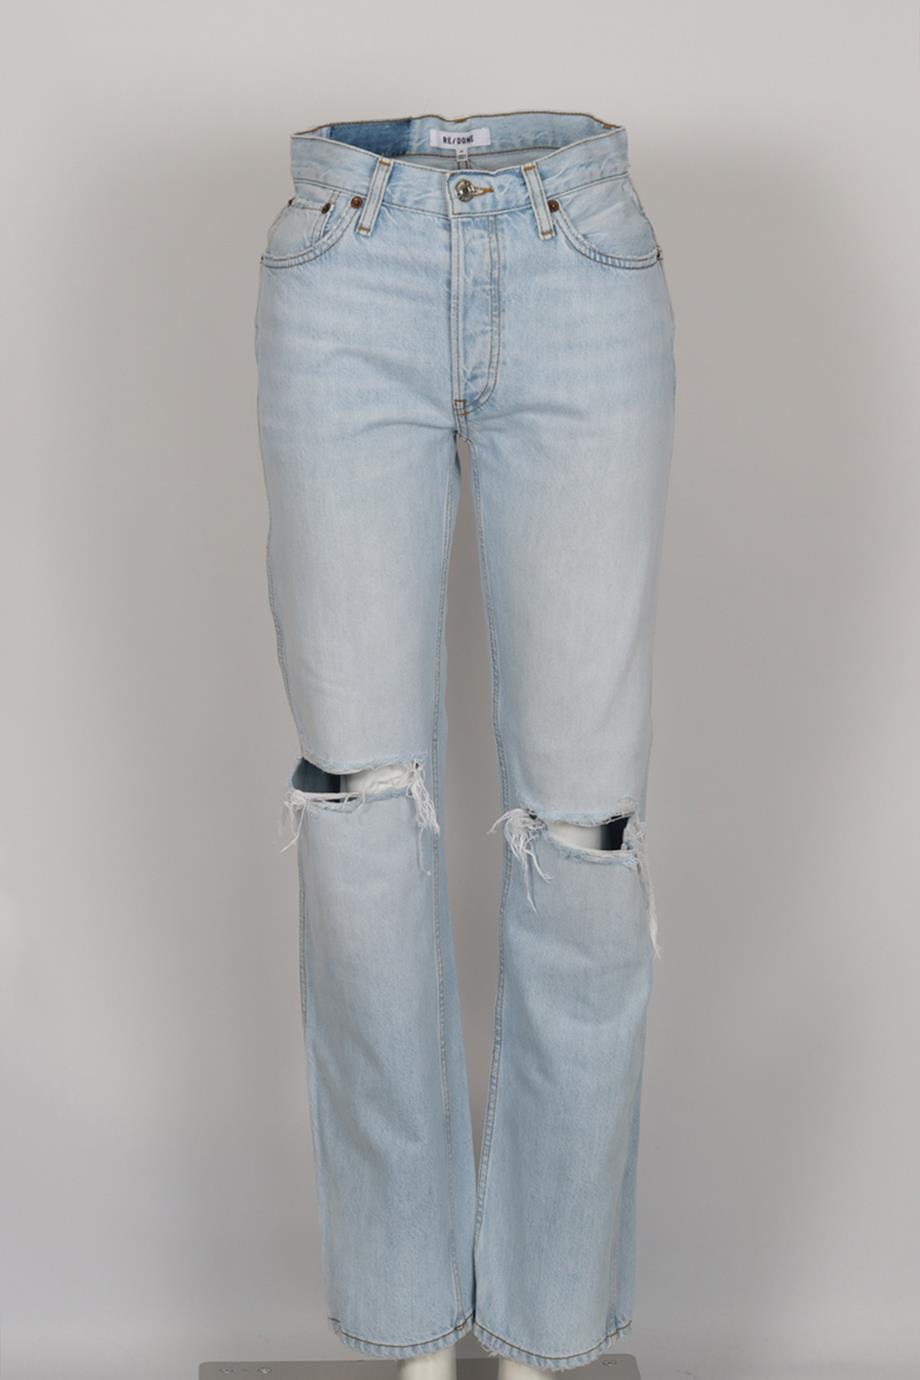 RE/DONE DISTRESSED HIGH RISE STRAIGHT LEG JEANS W25 UK 6-8